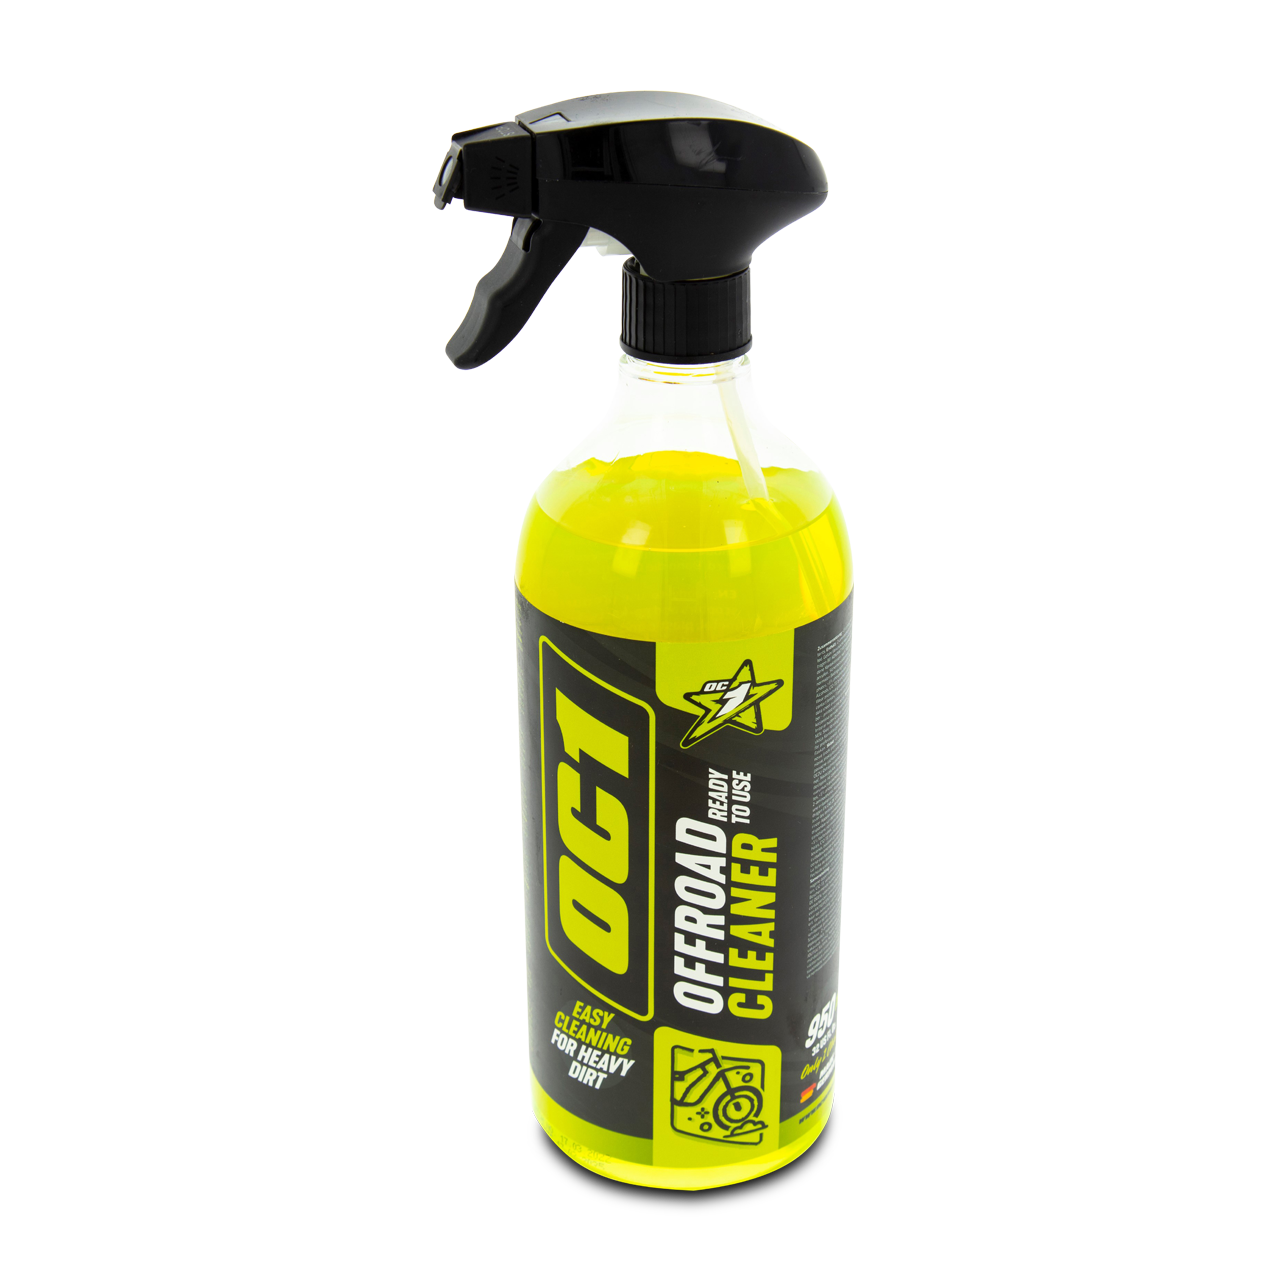 A9 Racing Chain Cleaner 2-pack (2 x 400ml) - Now 15% Savings